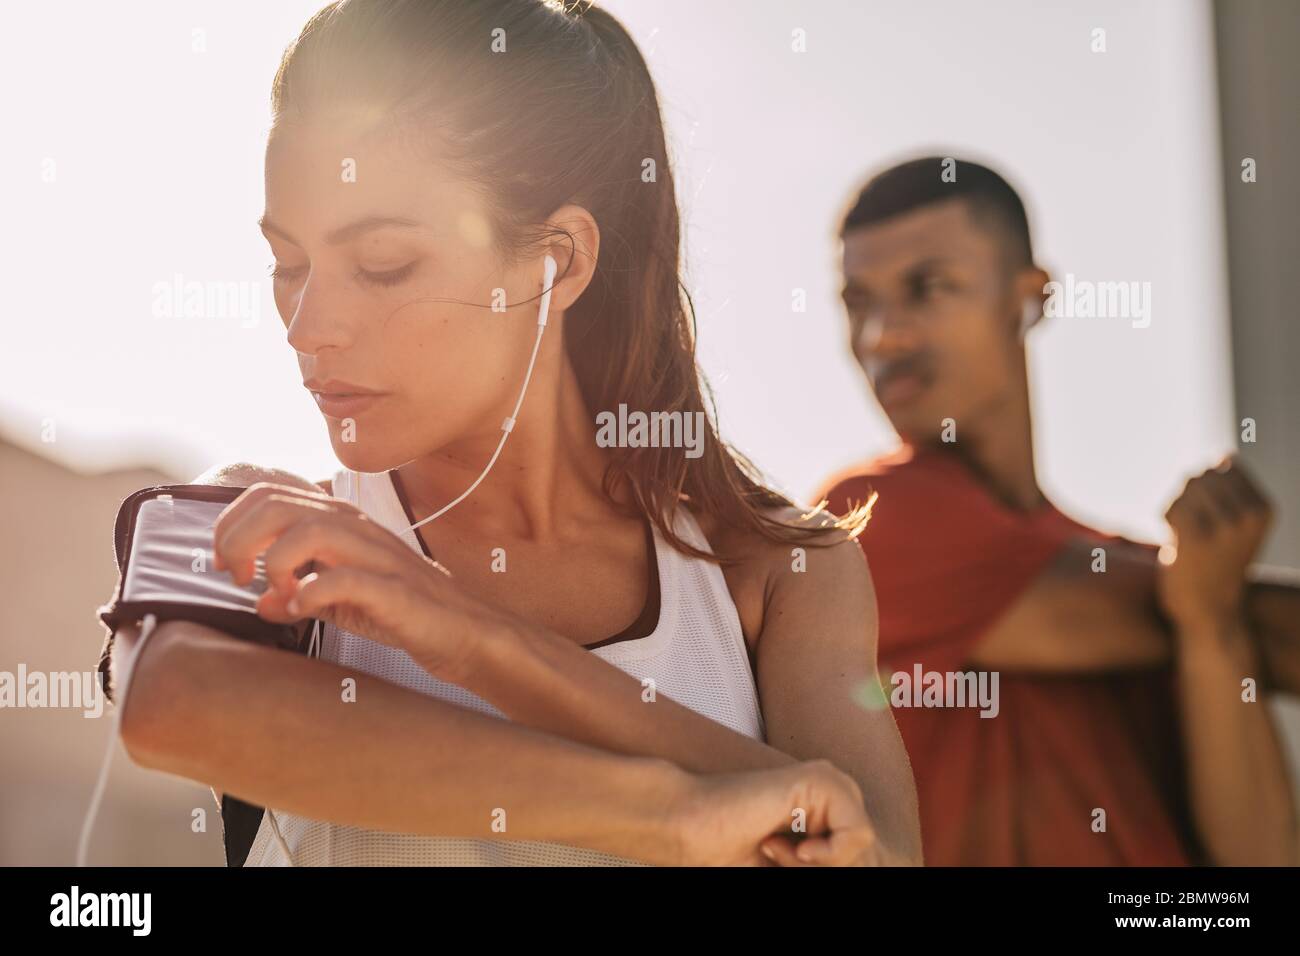 Close-up of a woman listening to music with earphones from her smart phone while exercising in the city with a man in background. Woman using a smartp Stock Photo